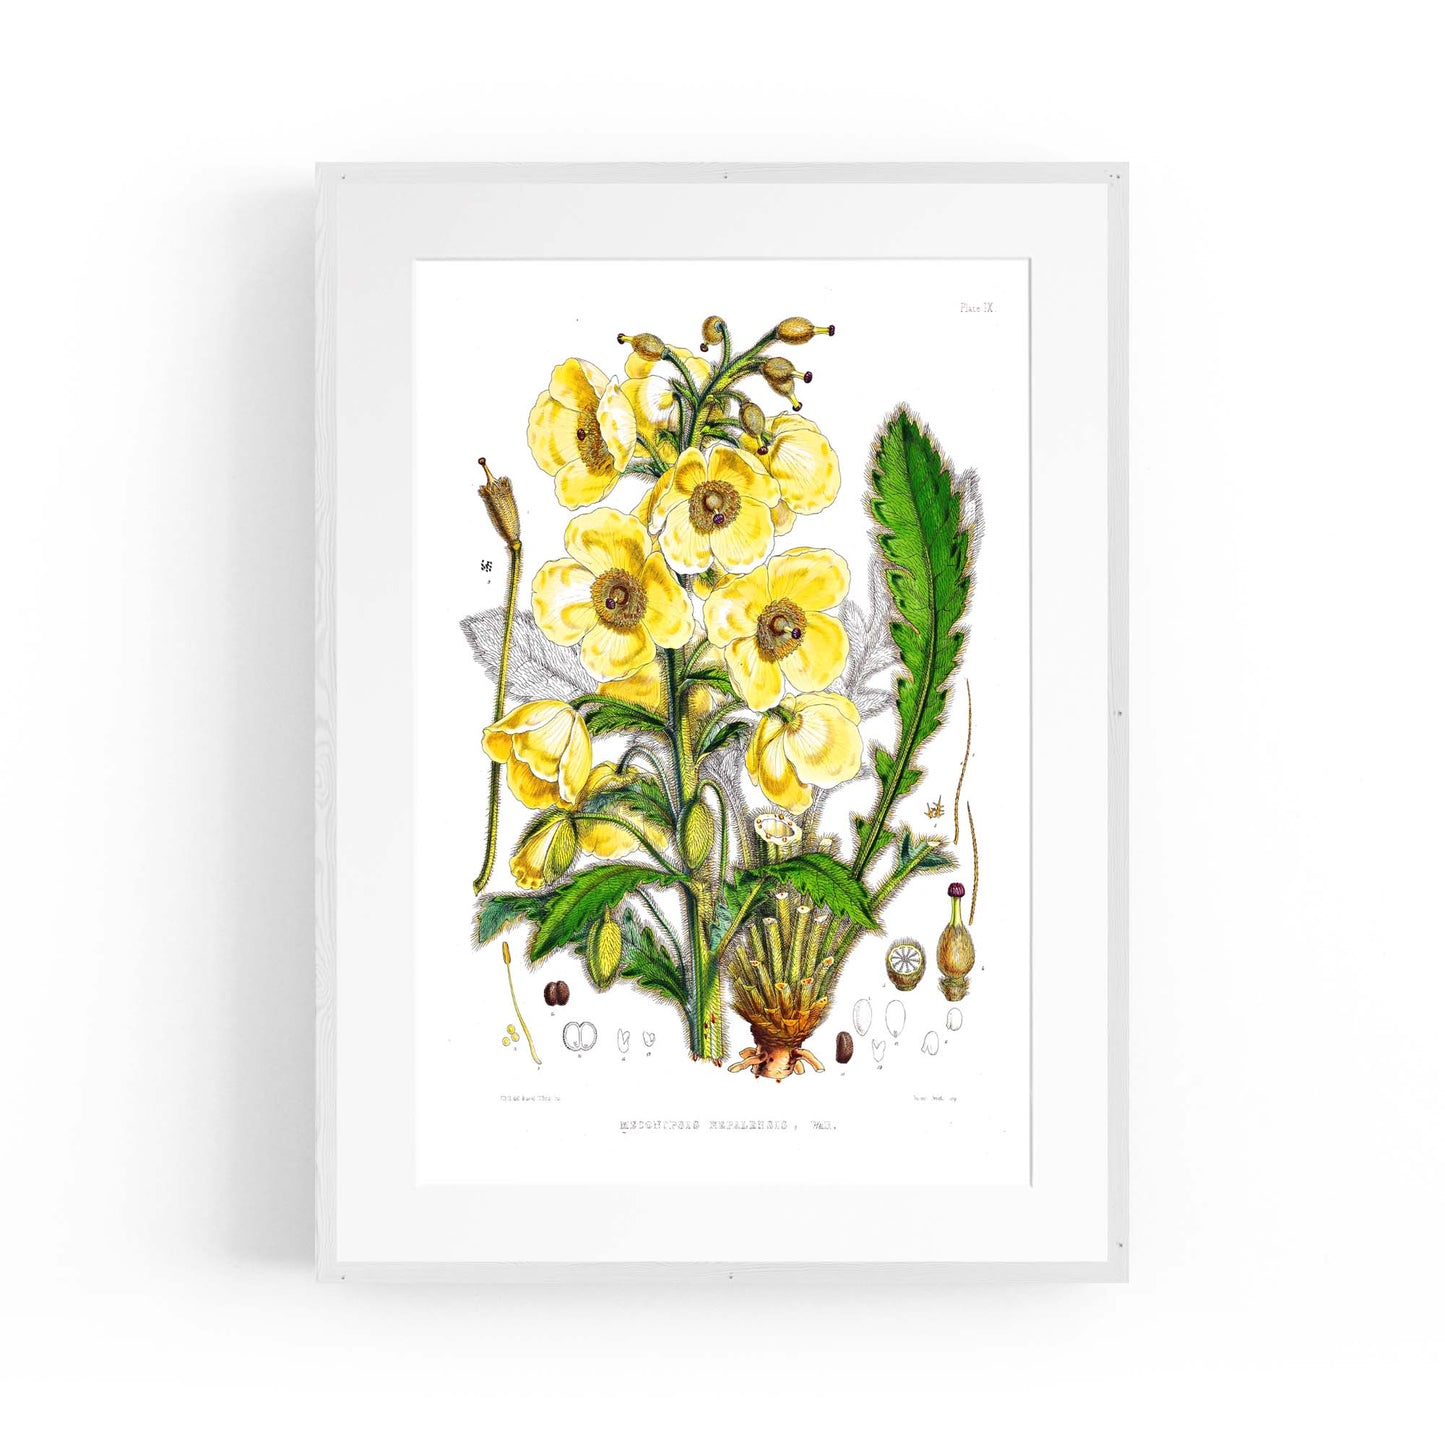 Yellow Flower Vintage Botanical Kitchen Wall Art #5 - The Affordable Art Company